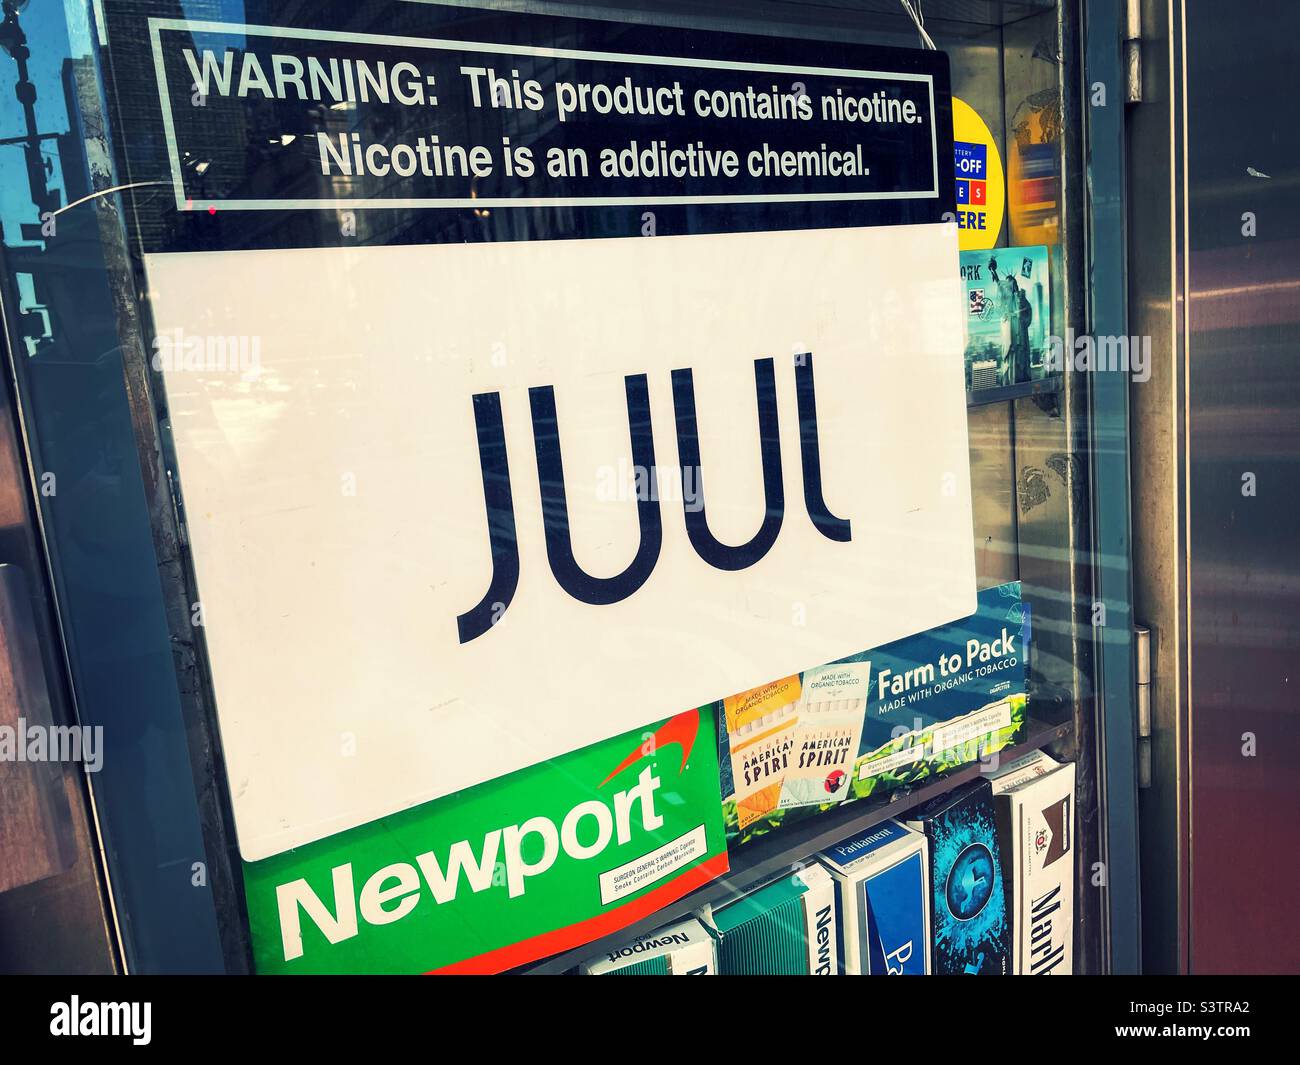 July Is an electtonic cigarette that dispenses nicotine via a one time use cartridge, USA Stock Photo